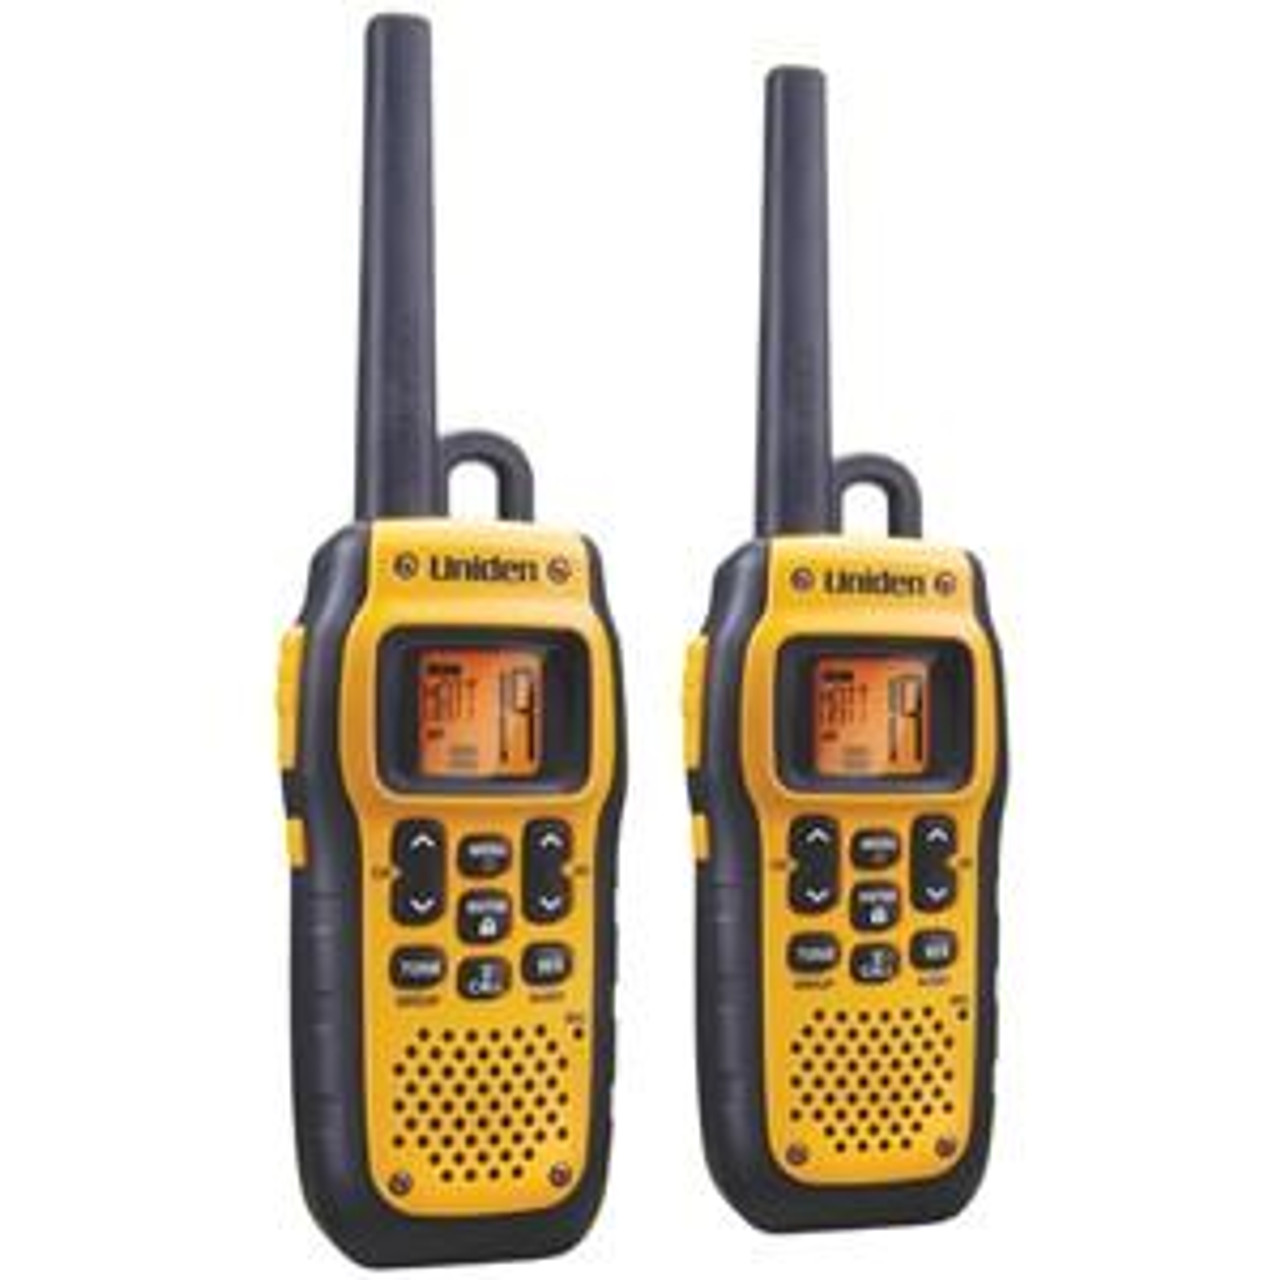 GMR2872-2CK Uniden GMR2872-2CK Two Way Radio15 GMRS, 7 FRS 28 Mile